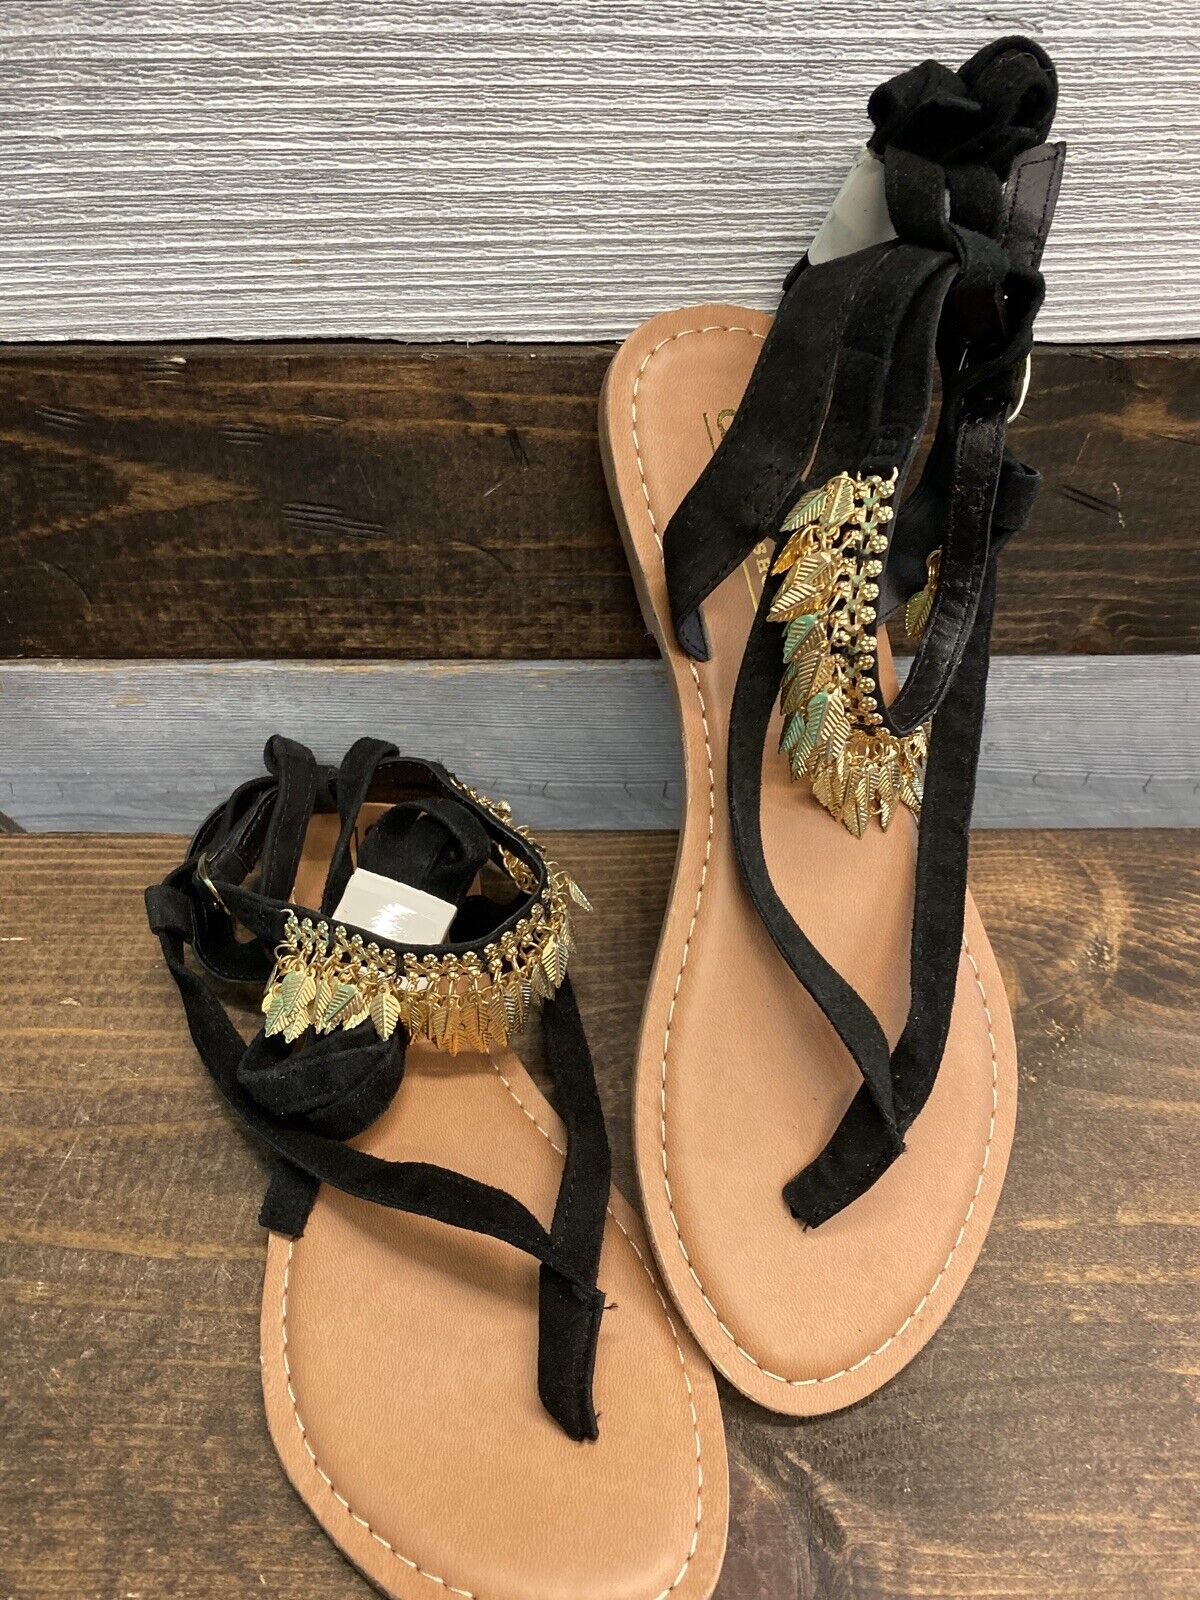 NEW Asos Womens Lace Up Black Sandals With Gold Leafs Size 5*